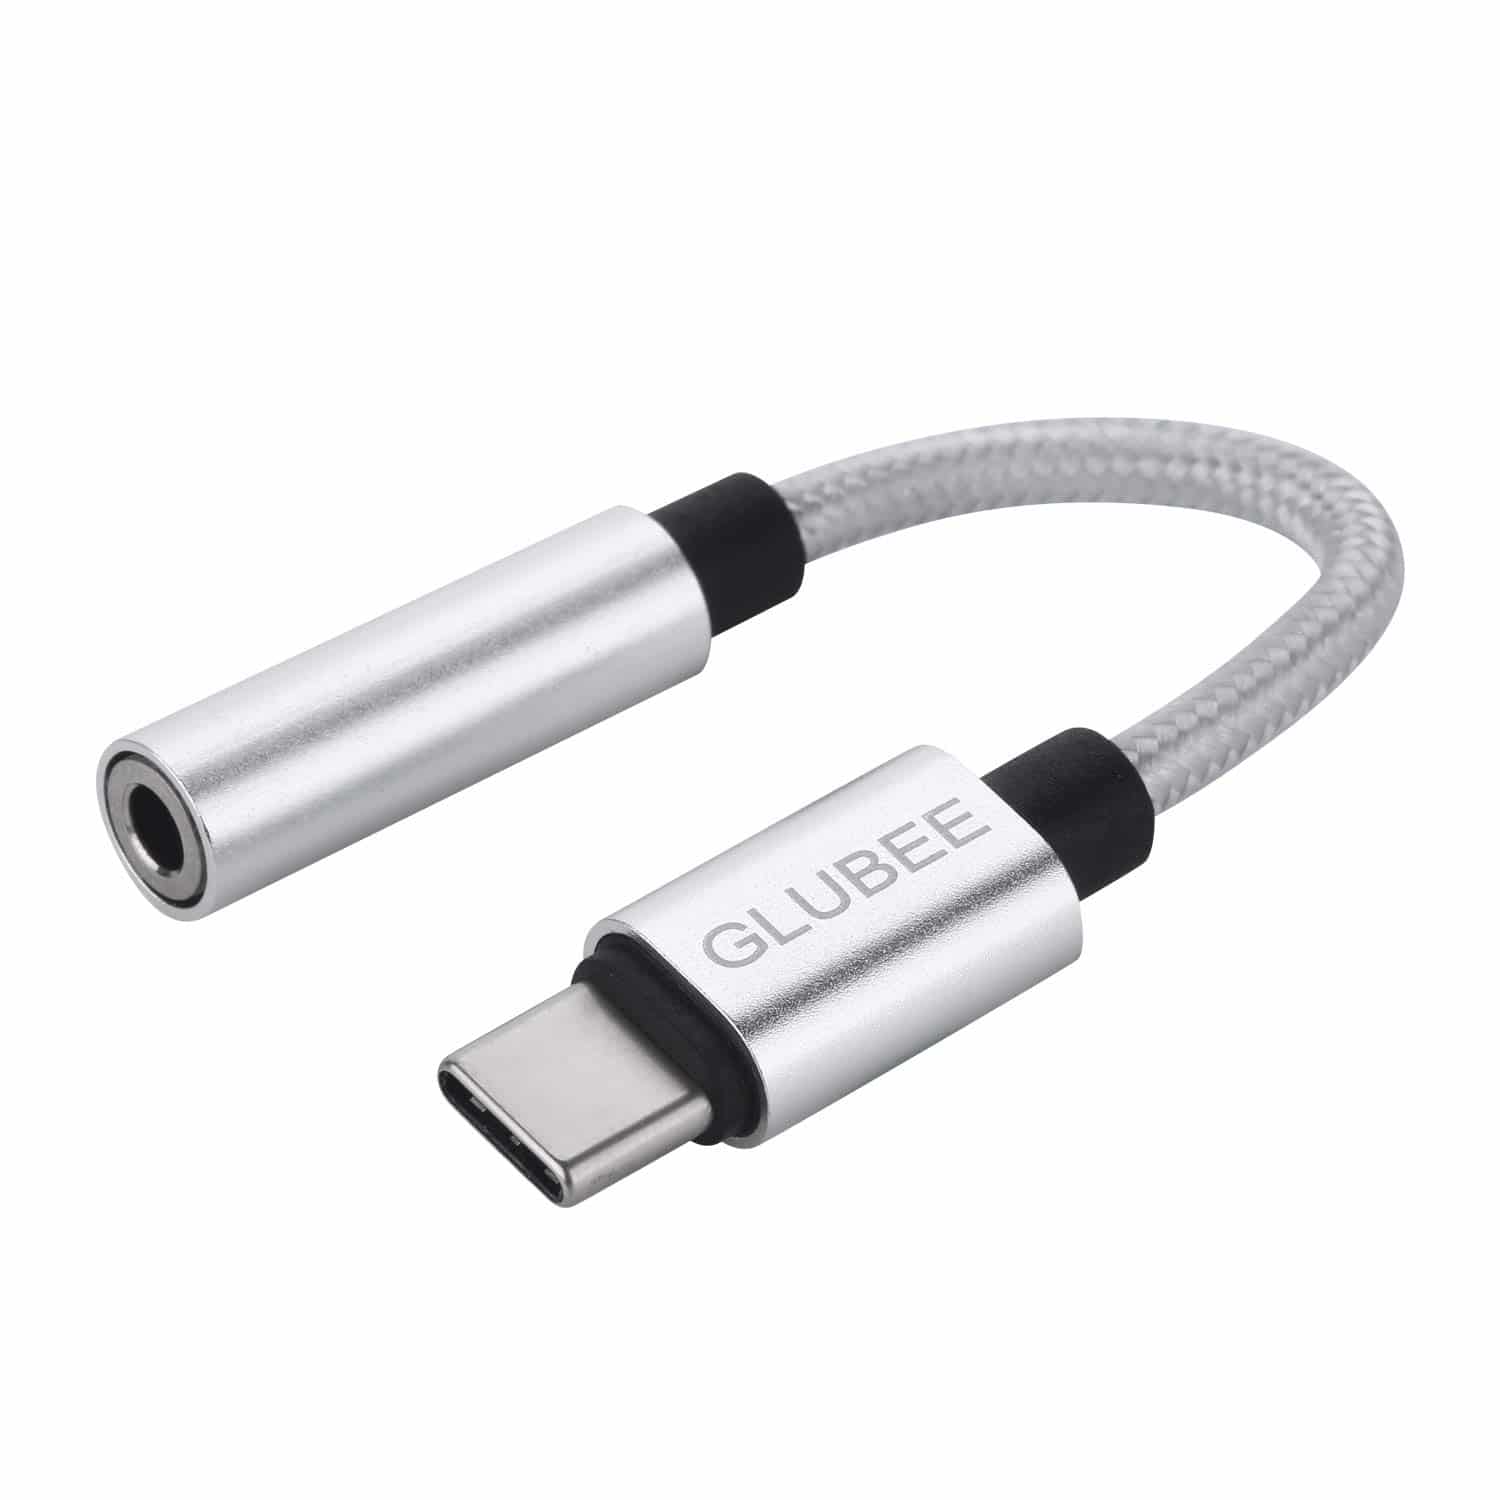 USB-C to 3.5mm Adapter for OnePlus 7 Pro